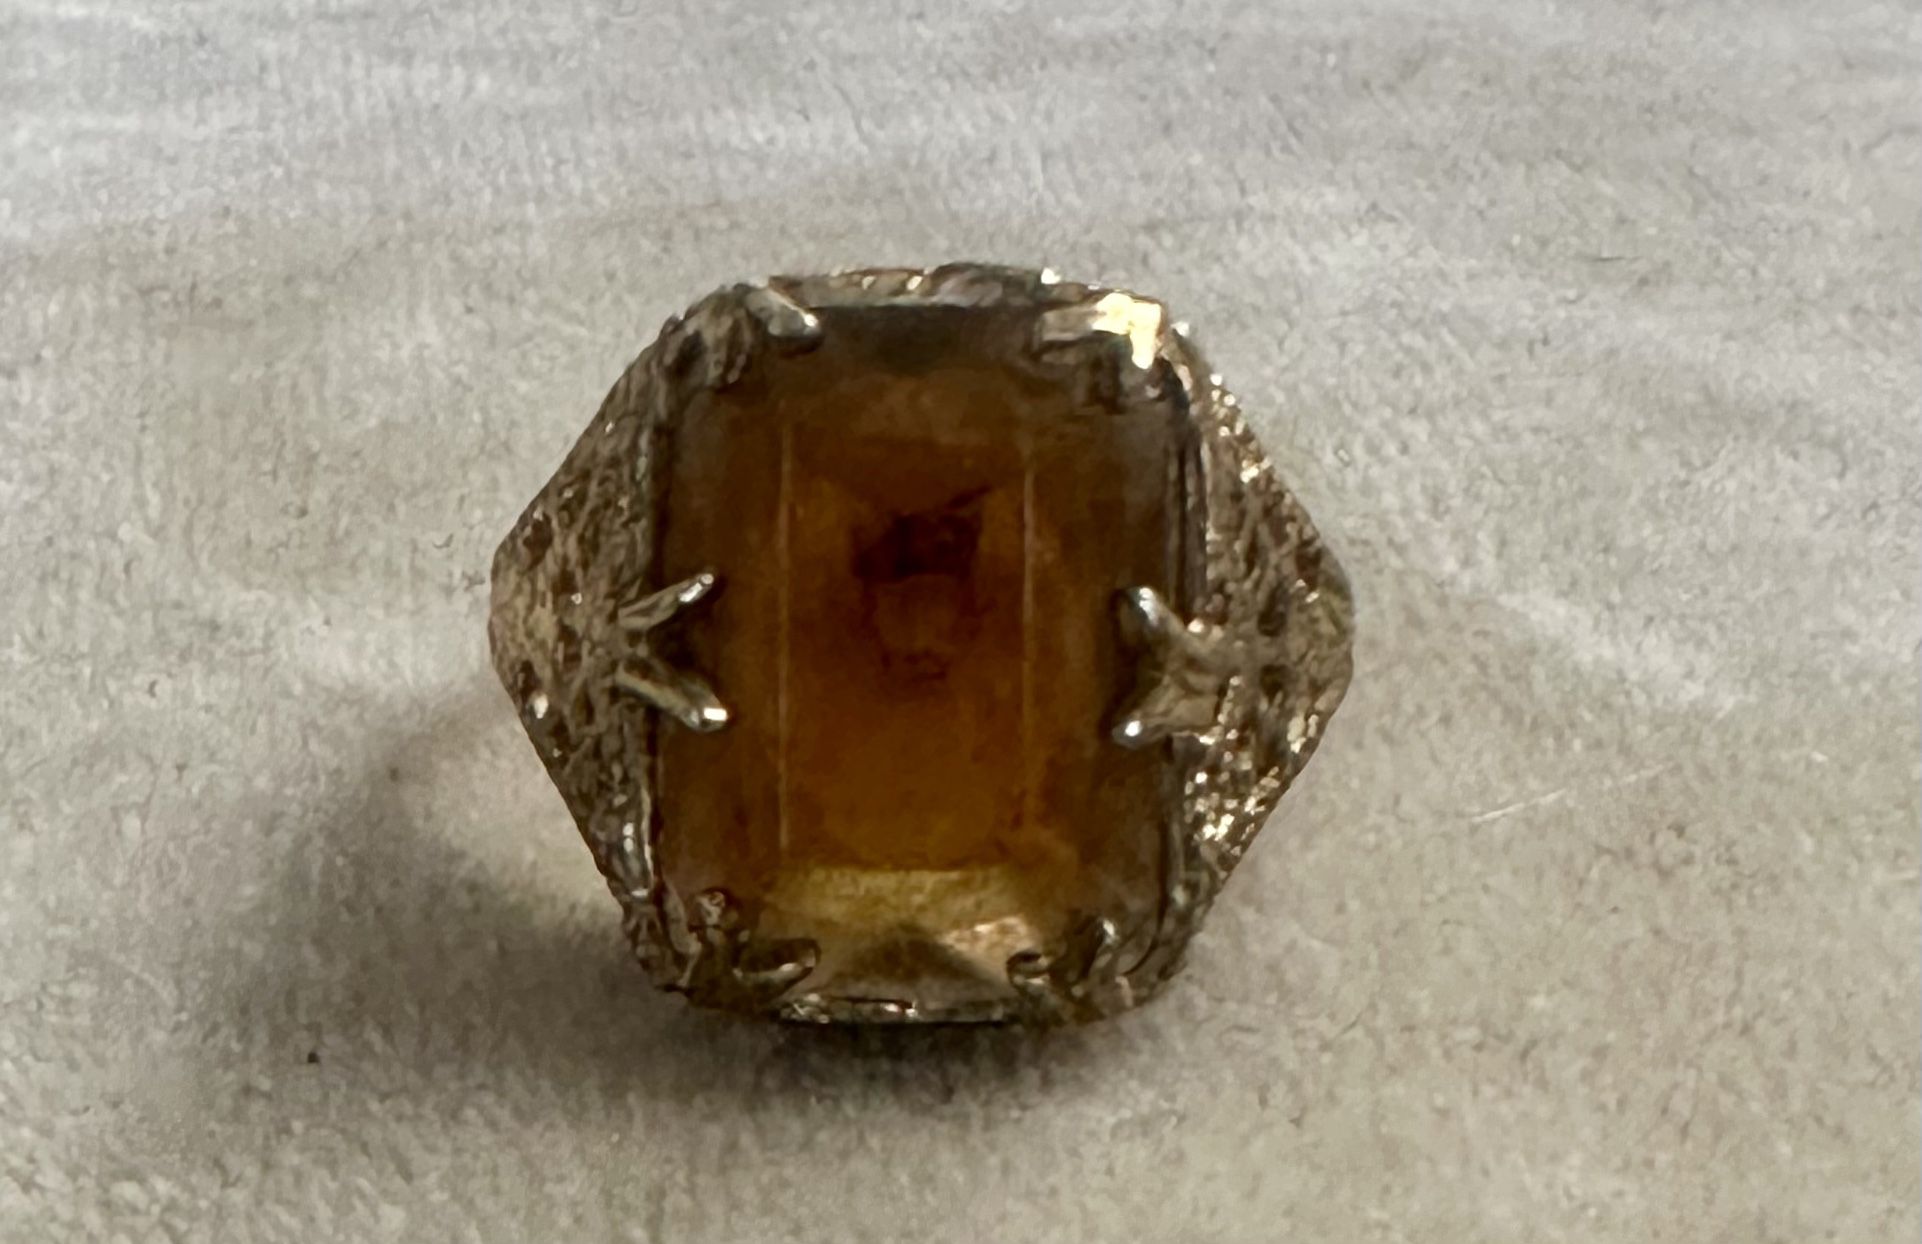 Vintage 14k GE Gold Plated, Topaz Cocktail Ring, Size 6.5, 3.6 grams Total Weight